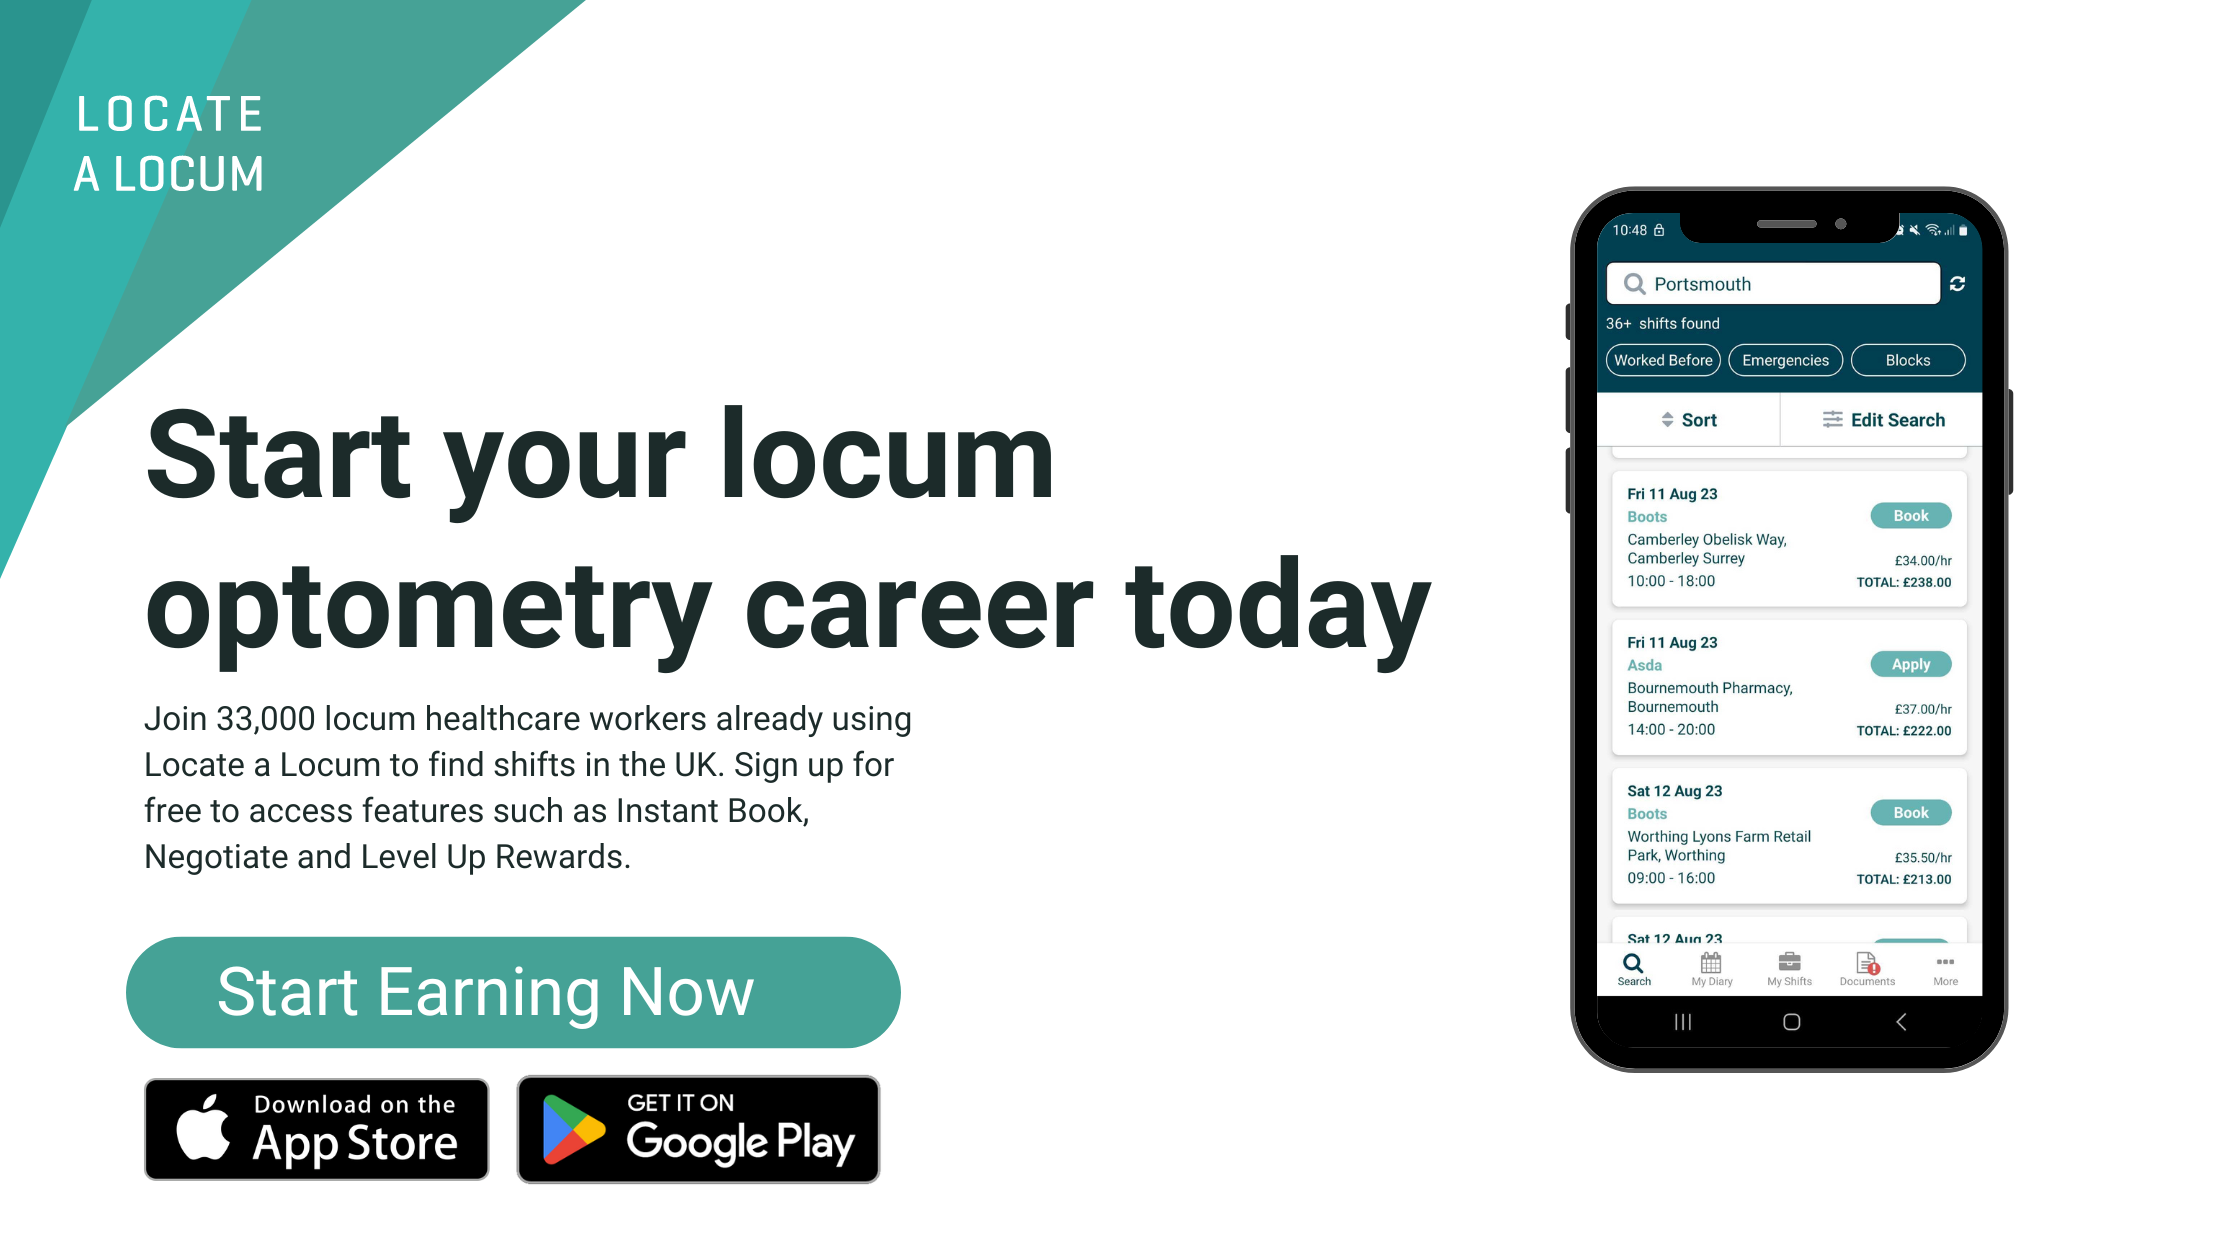 sign-up-today-as-a-locum-optometrist-with-locate-a-locum